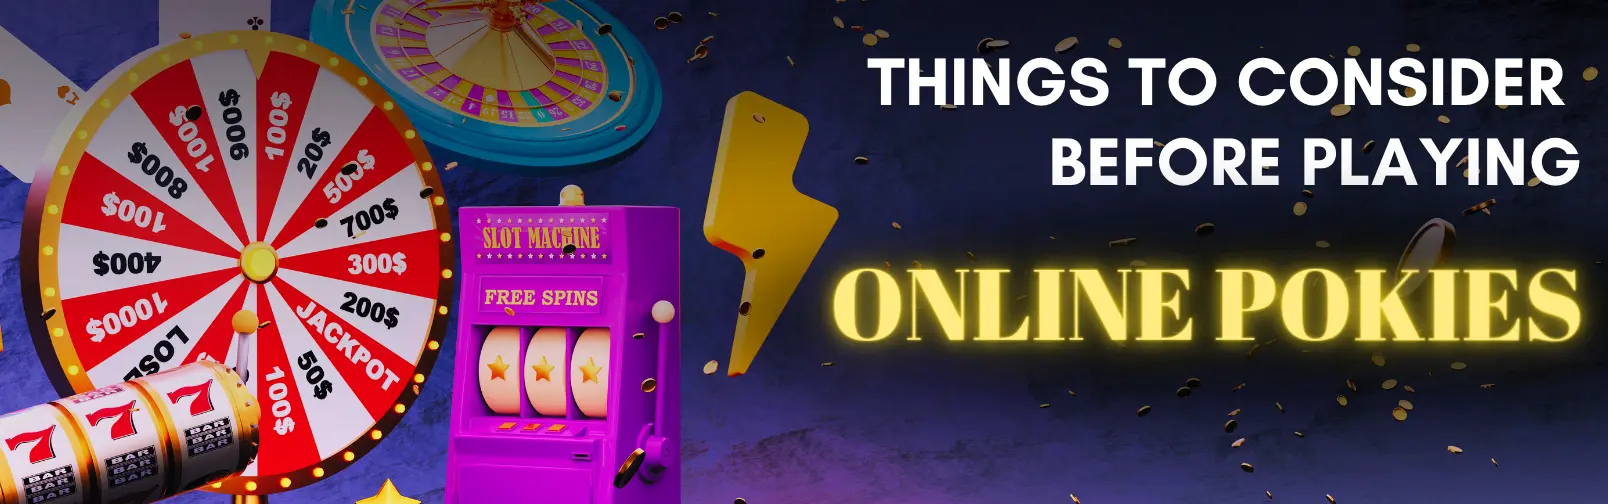 Things-to-Consider-Before-Playing-Online-Pokies